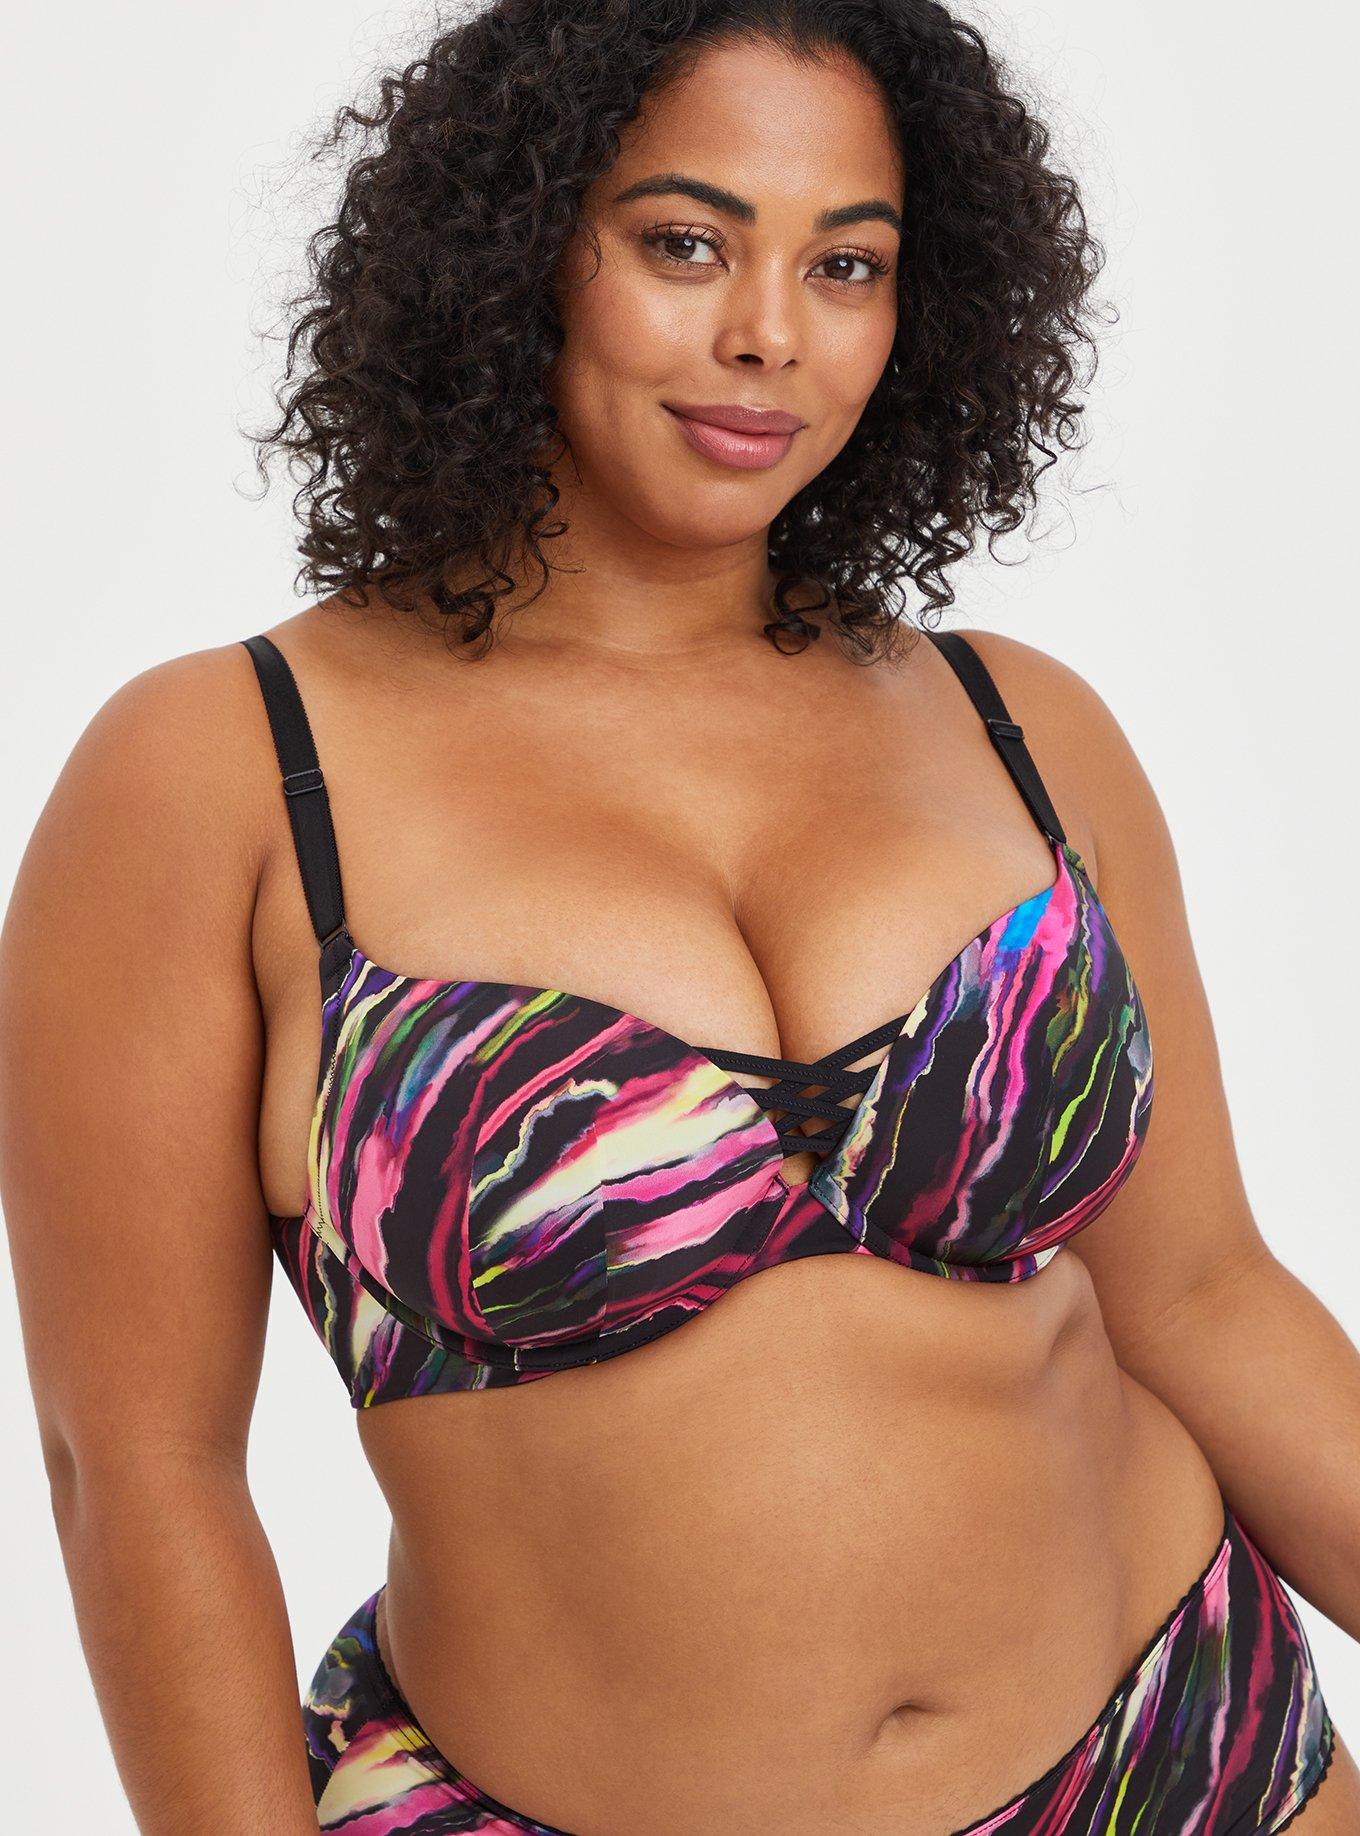 Torrid Curve Plus Size Women's Purple Push Up Strapless Lace Bra Size 40C -  $23 - From Kelly